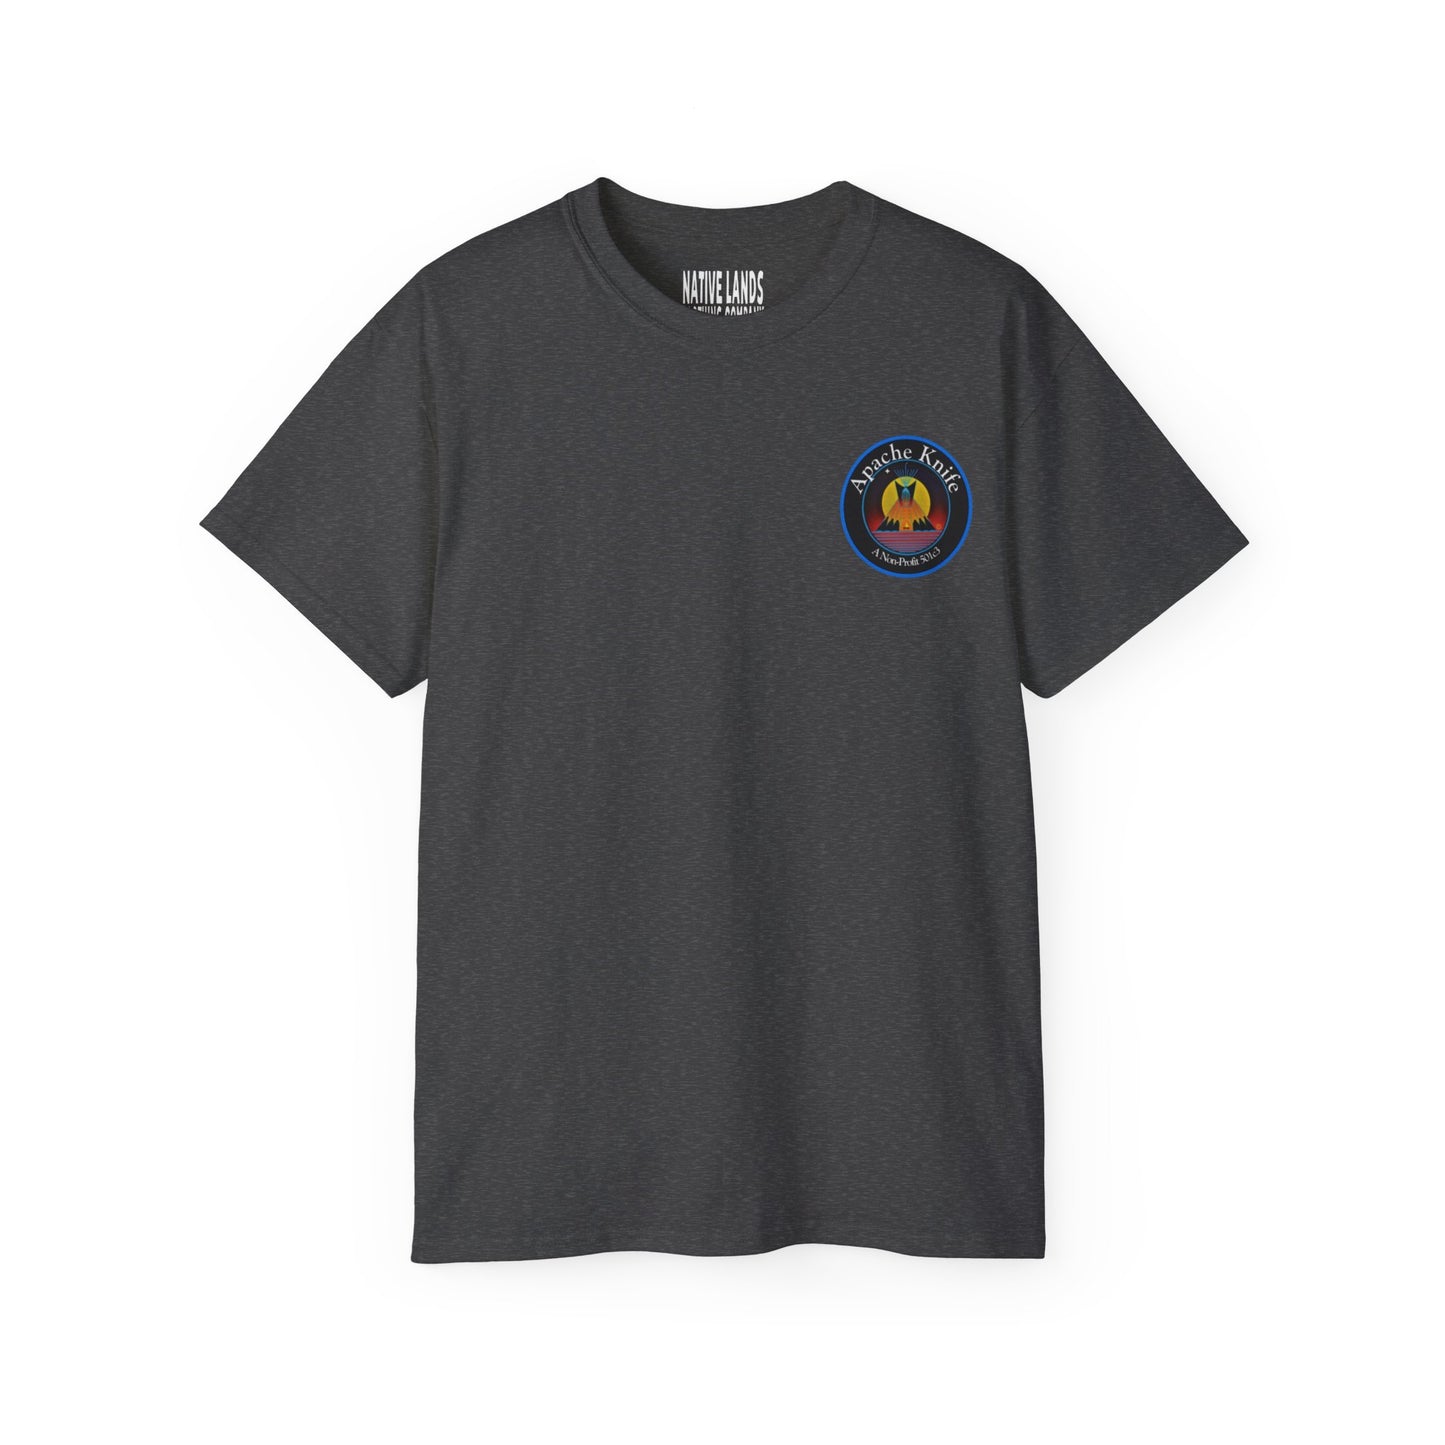 Apache Knife Foundation Shirt Non-Profit Native American (Special Order)